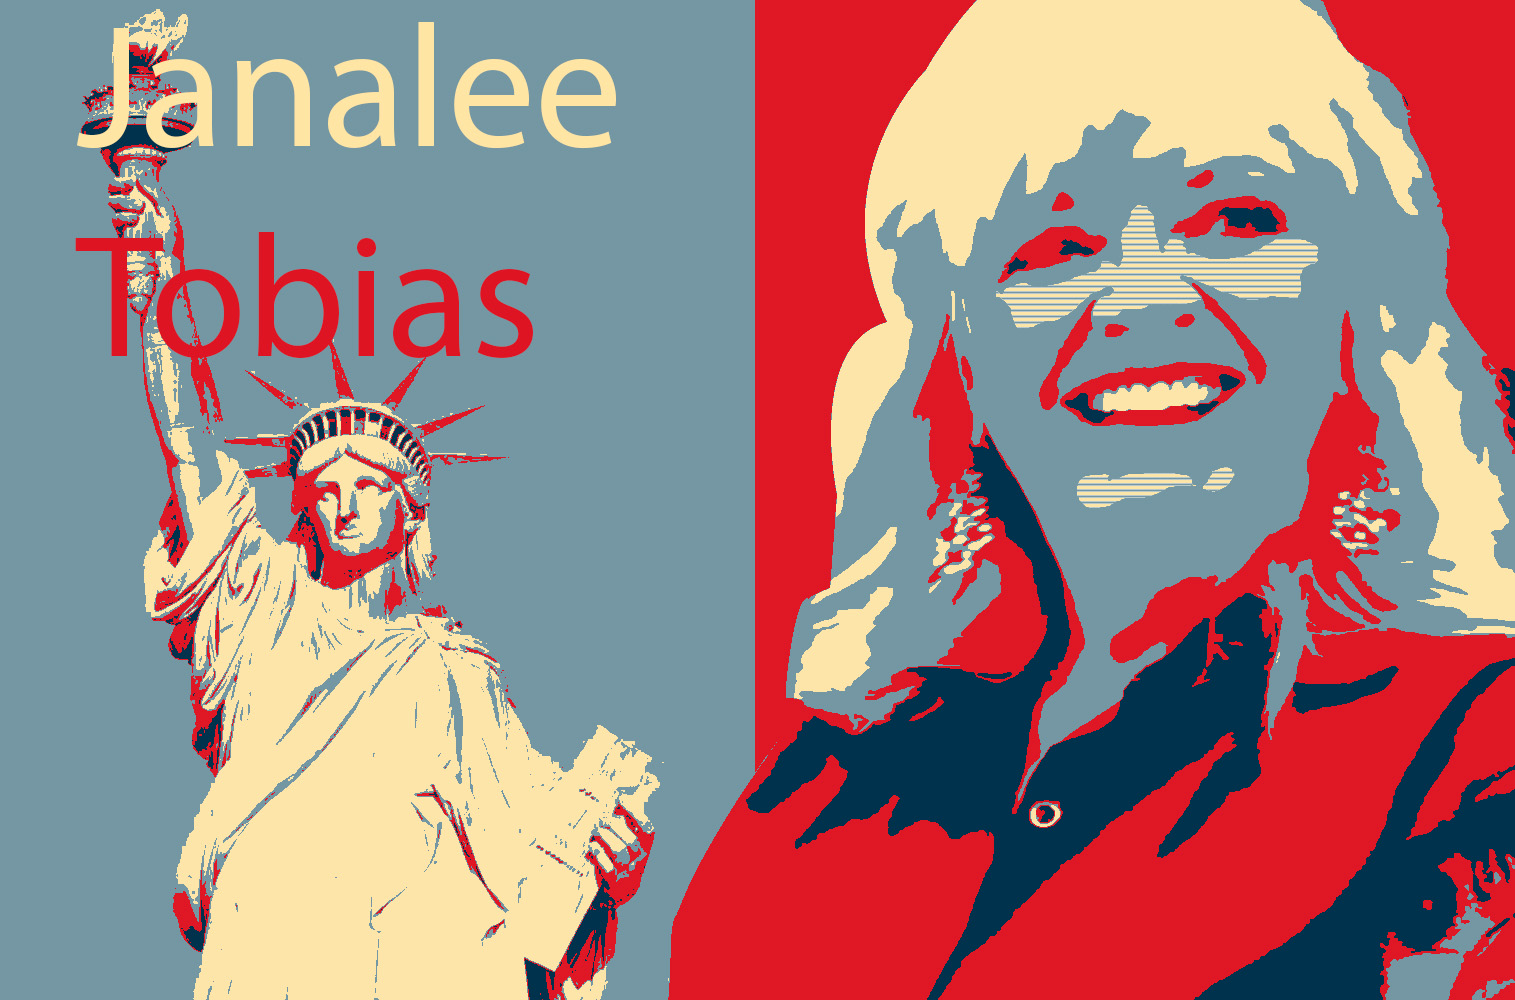 Janalee Tobias has been one of Utah's most prominent gun rights activists for decades. Her passion and persistence have earned her the title of 'Utah's statue of liberty,' according to her fellow activist Villina Greenwell.